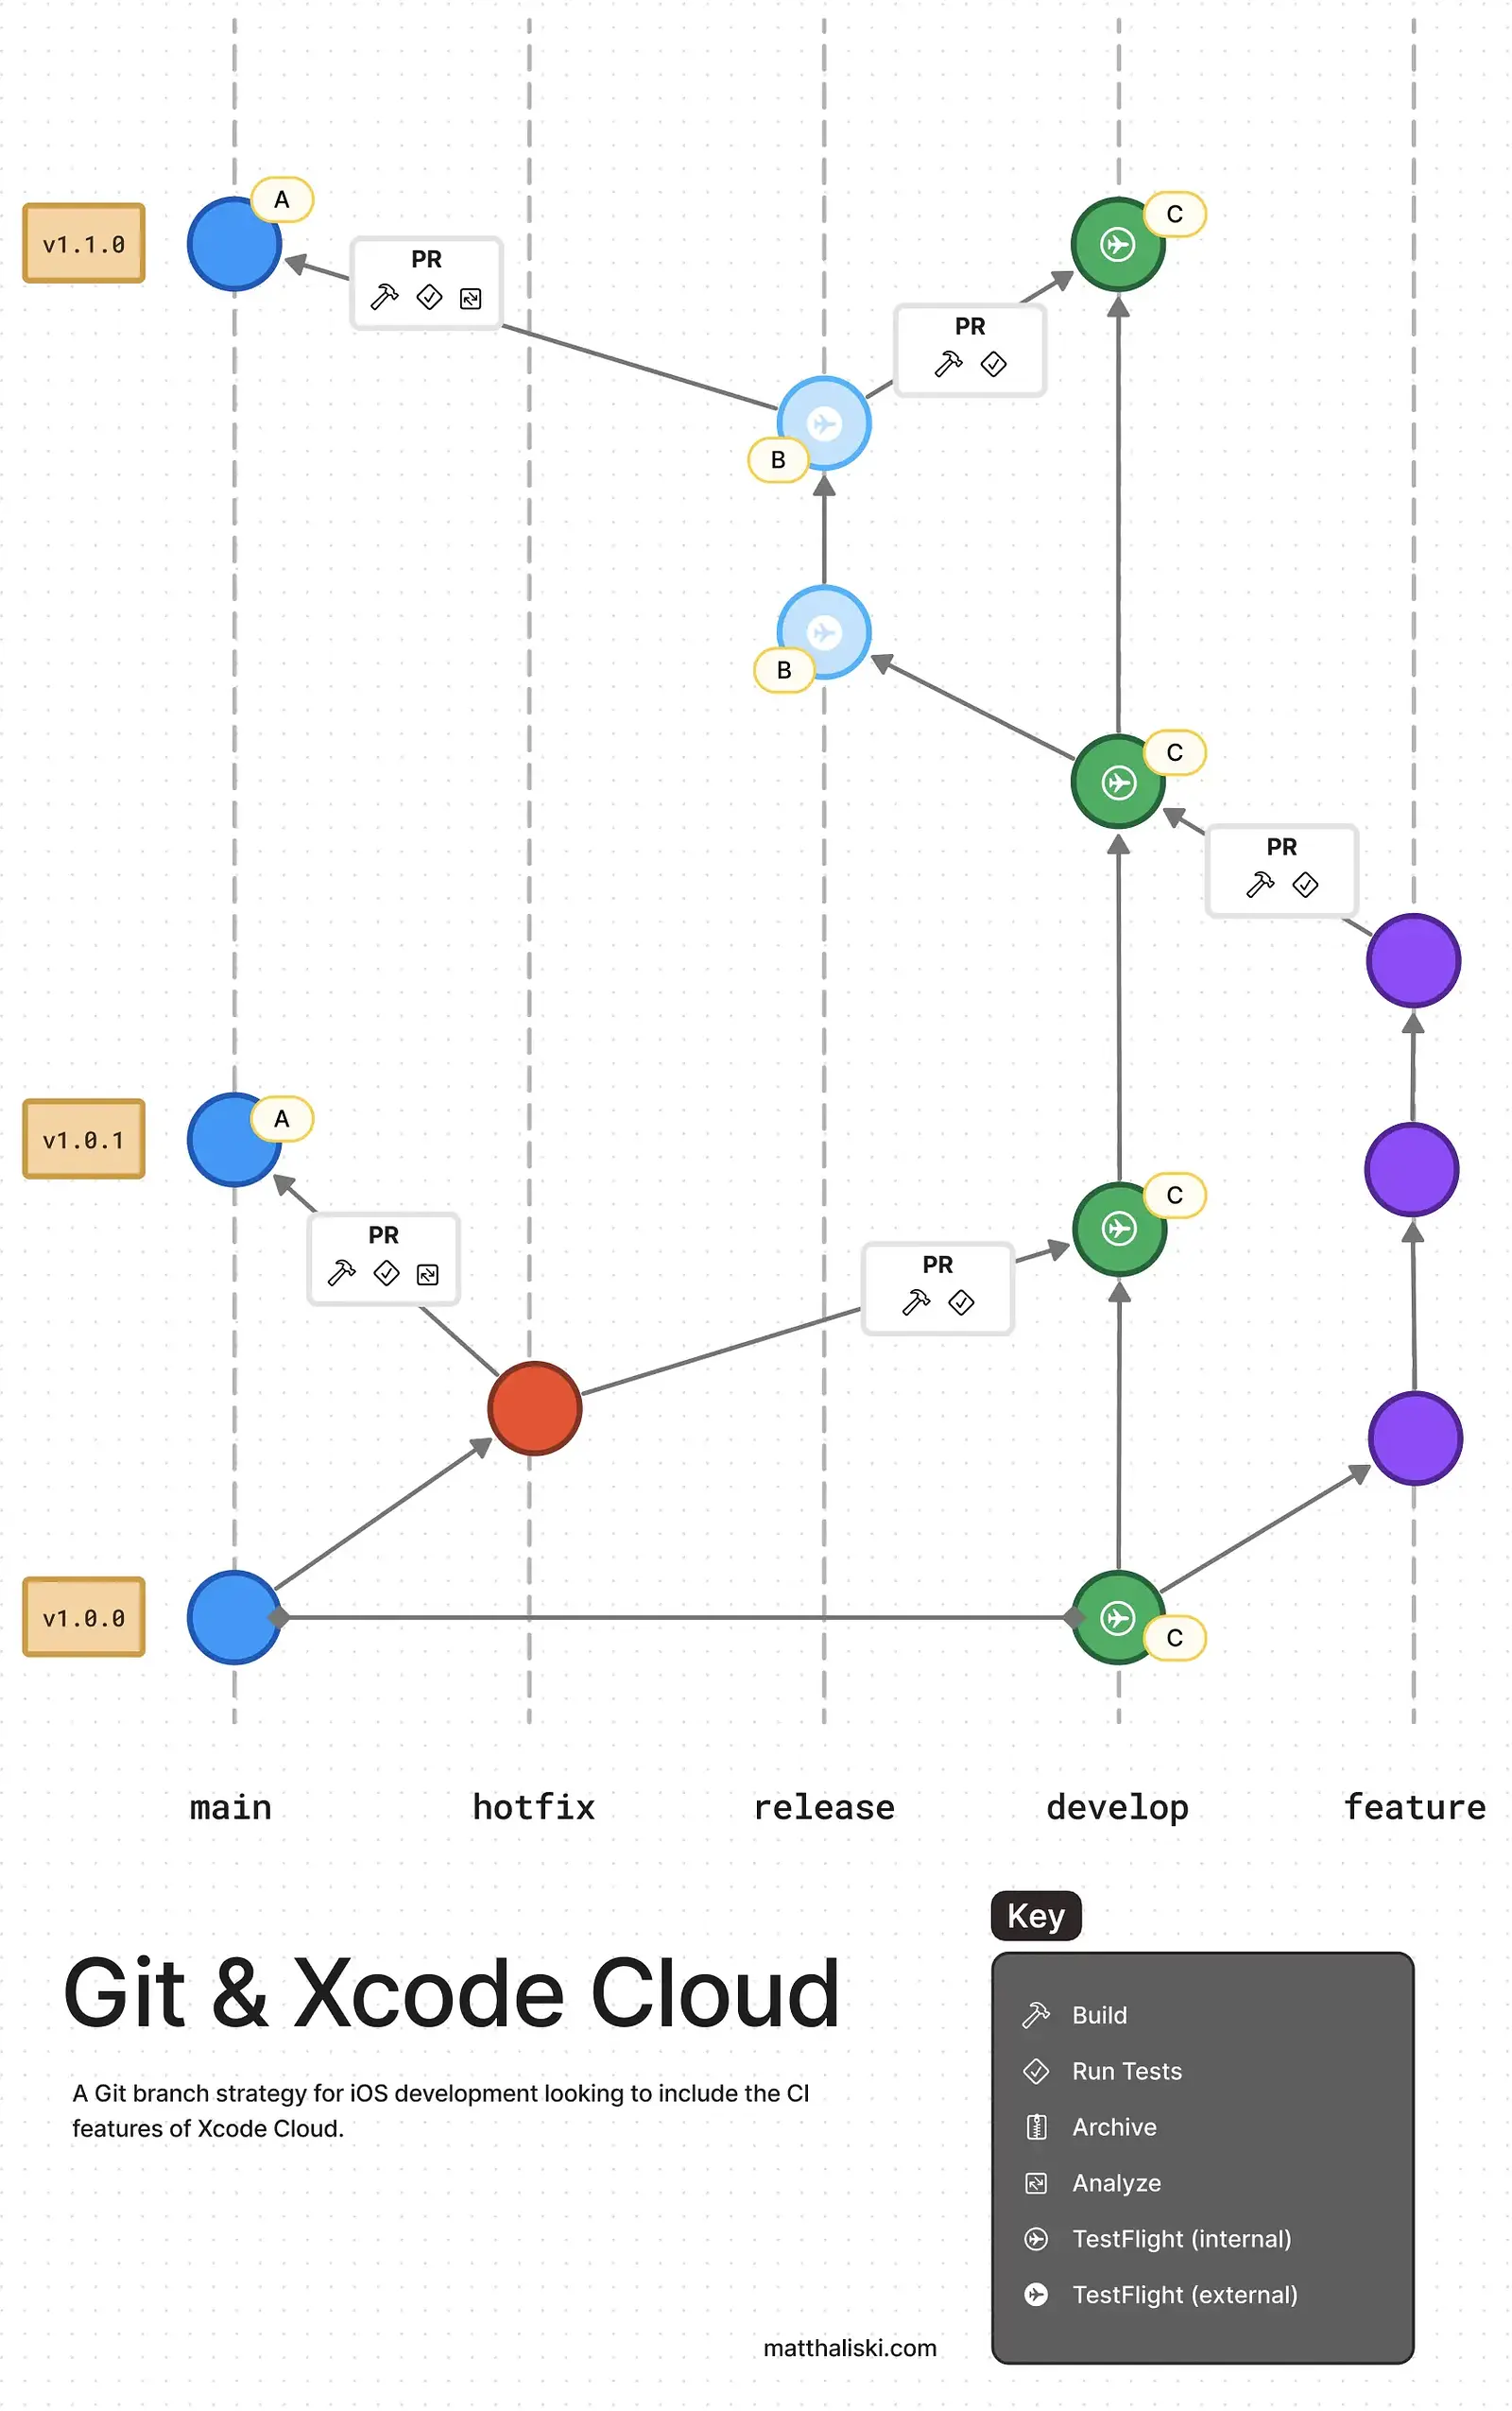 A figure showing branching strategy for iOS projects.